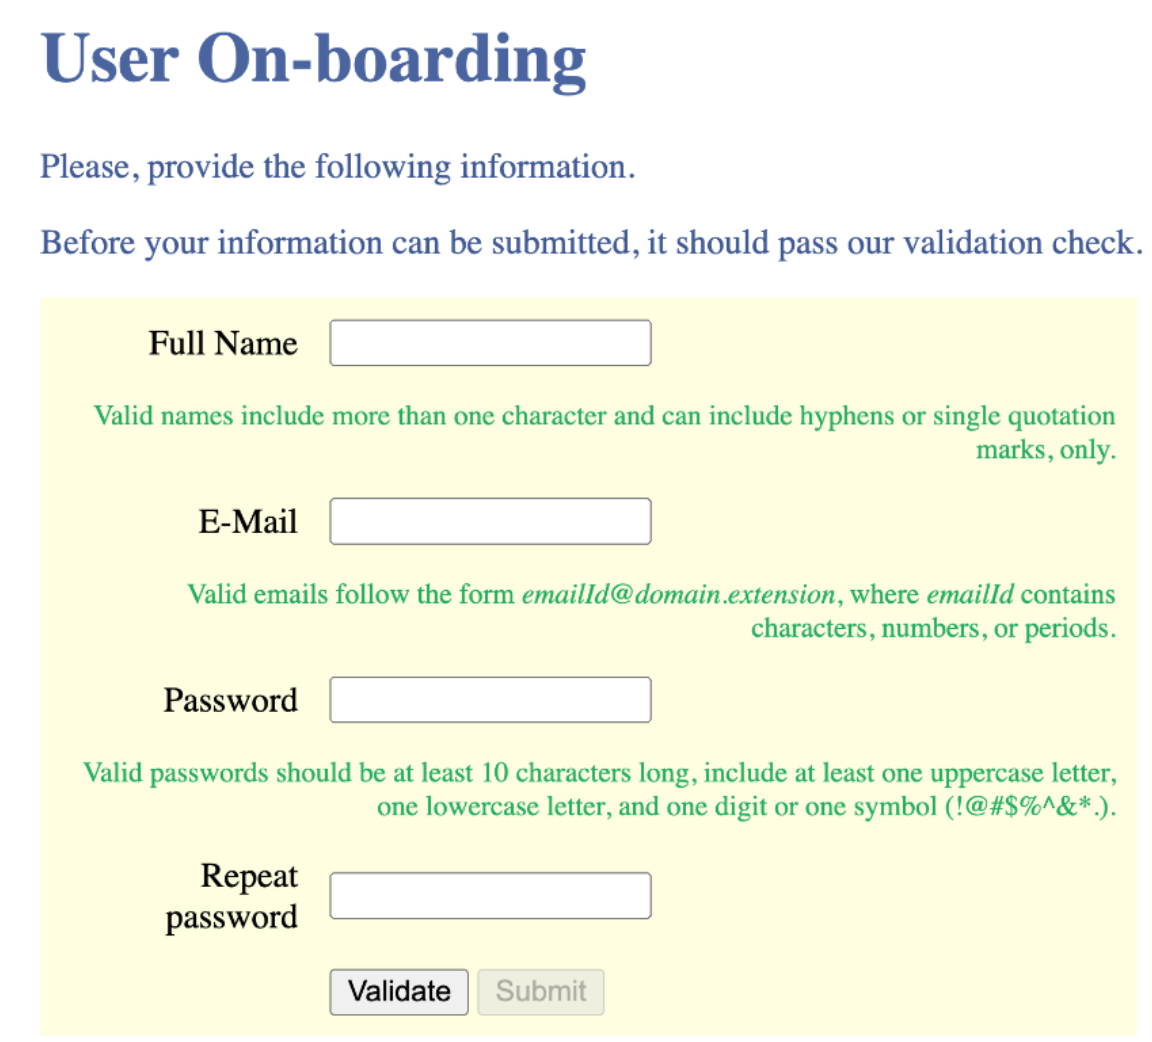 User On-boarding
Please, provide the following information.
Before your information can be submitted, it should pass our validation check.
Full Name
Valid names include more than one character and can include hyphens or single quotation
marks, only.
E-Mail
Valid emails follow the form emailld@domain.extension, where emailld contains
characters, numbers, or periods.
Password
Valid passwords should be at least 10 characters long, include at least one uppercase letter,
one lowercase letter, and one digit or one symbol (!@#$%^&* .).
Repeat
password
Validate
Submit
